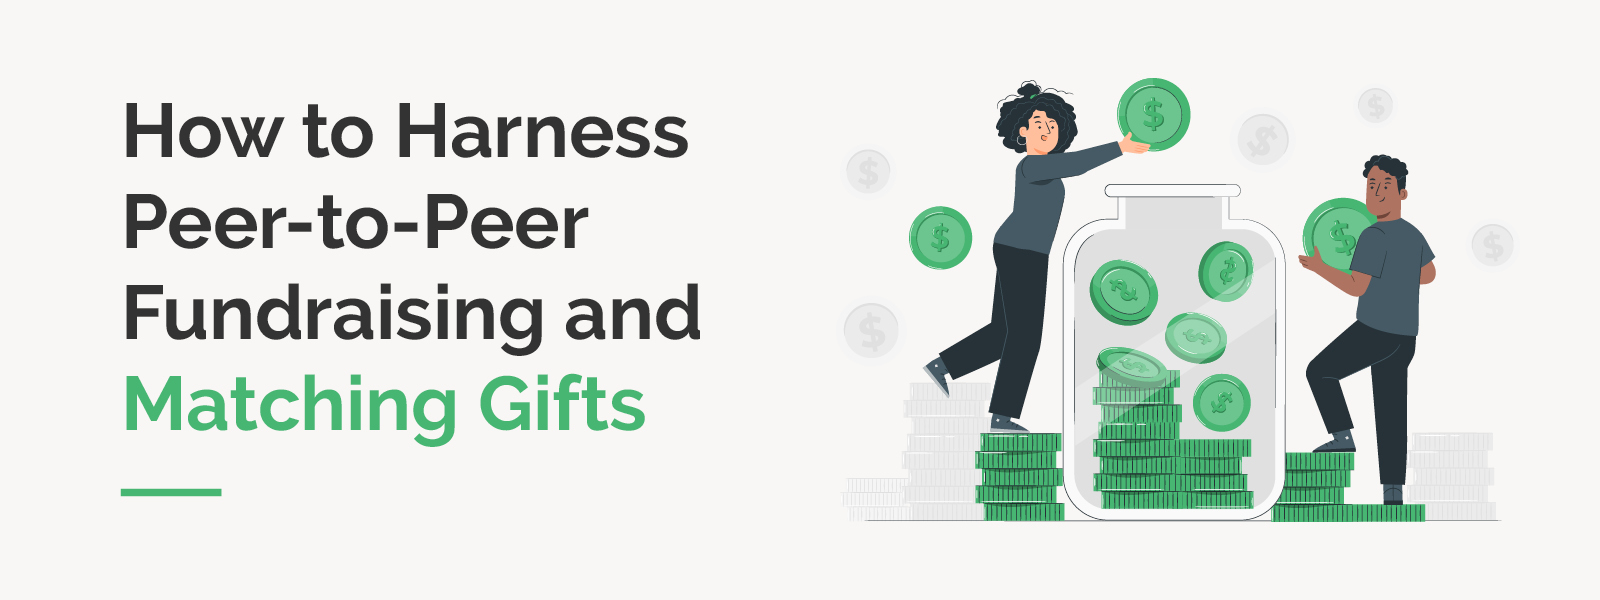 How to Harness Peer-to-Peer Fundraising and Matching Gifts